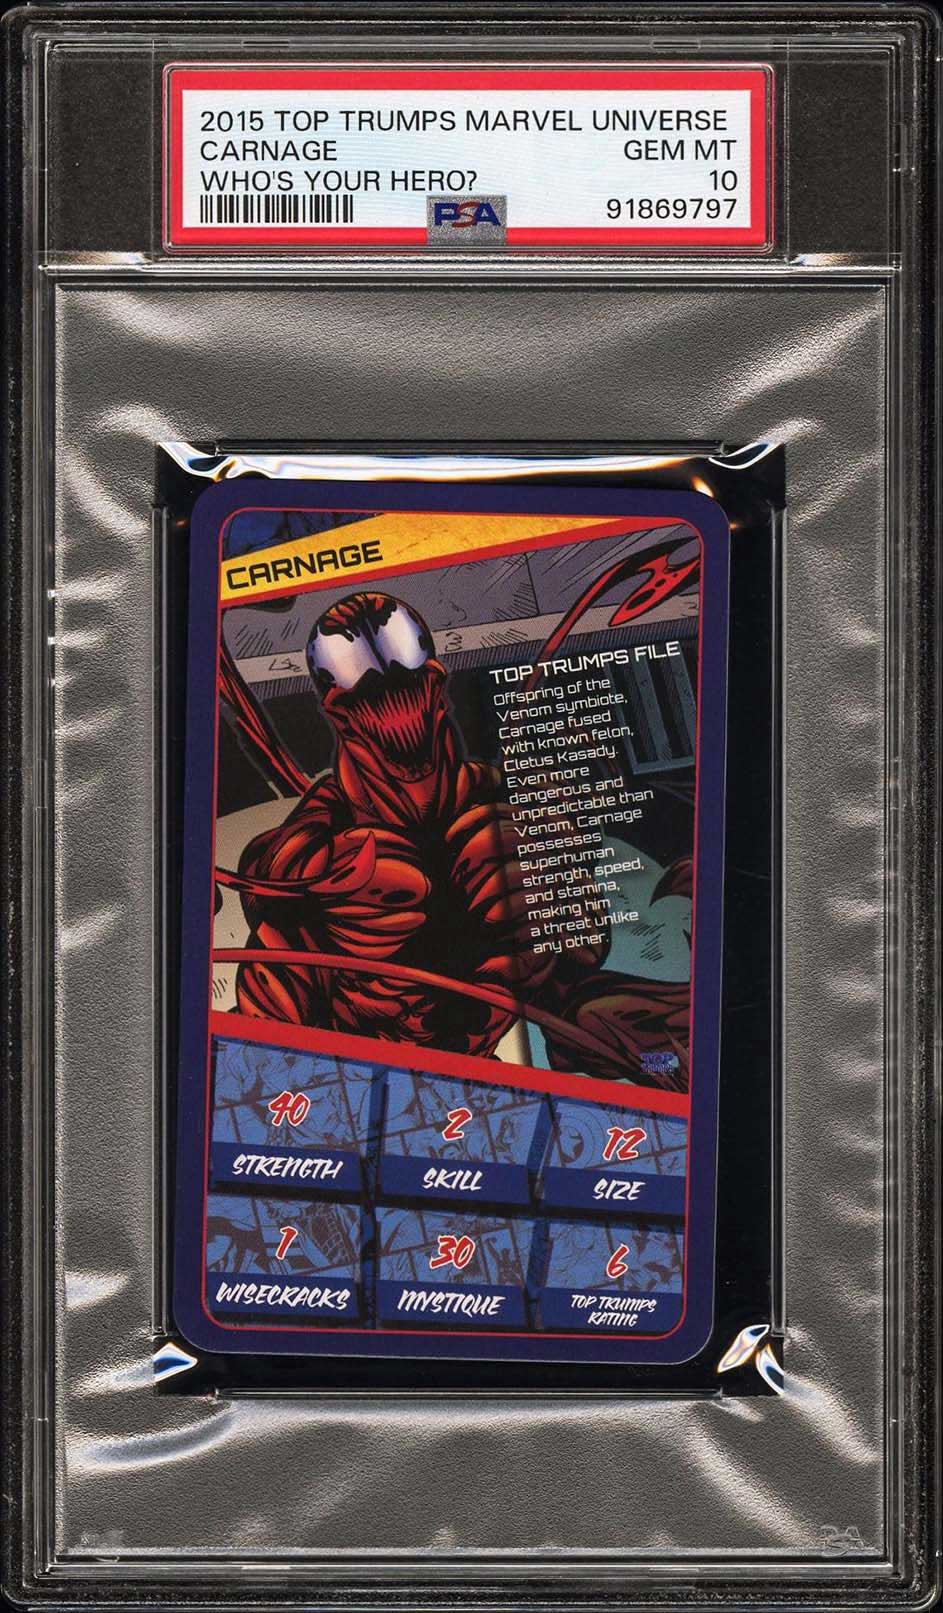 CARNAGE PSA 10 2015 Top Trumps Marvel Who's Your Hero? Pop Culture Base Graded Cards - Hobby Gems